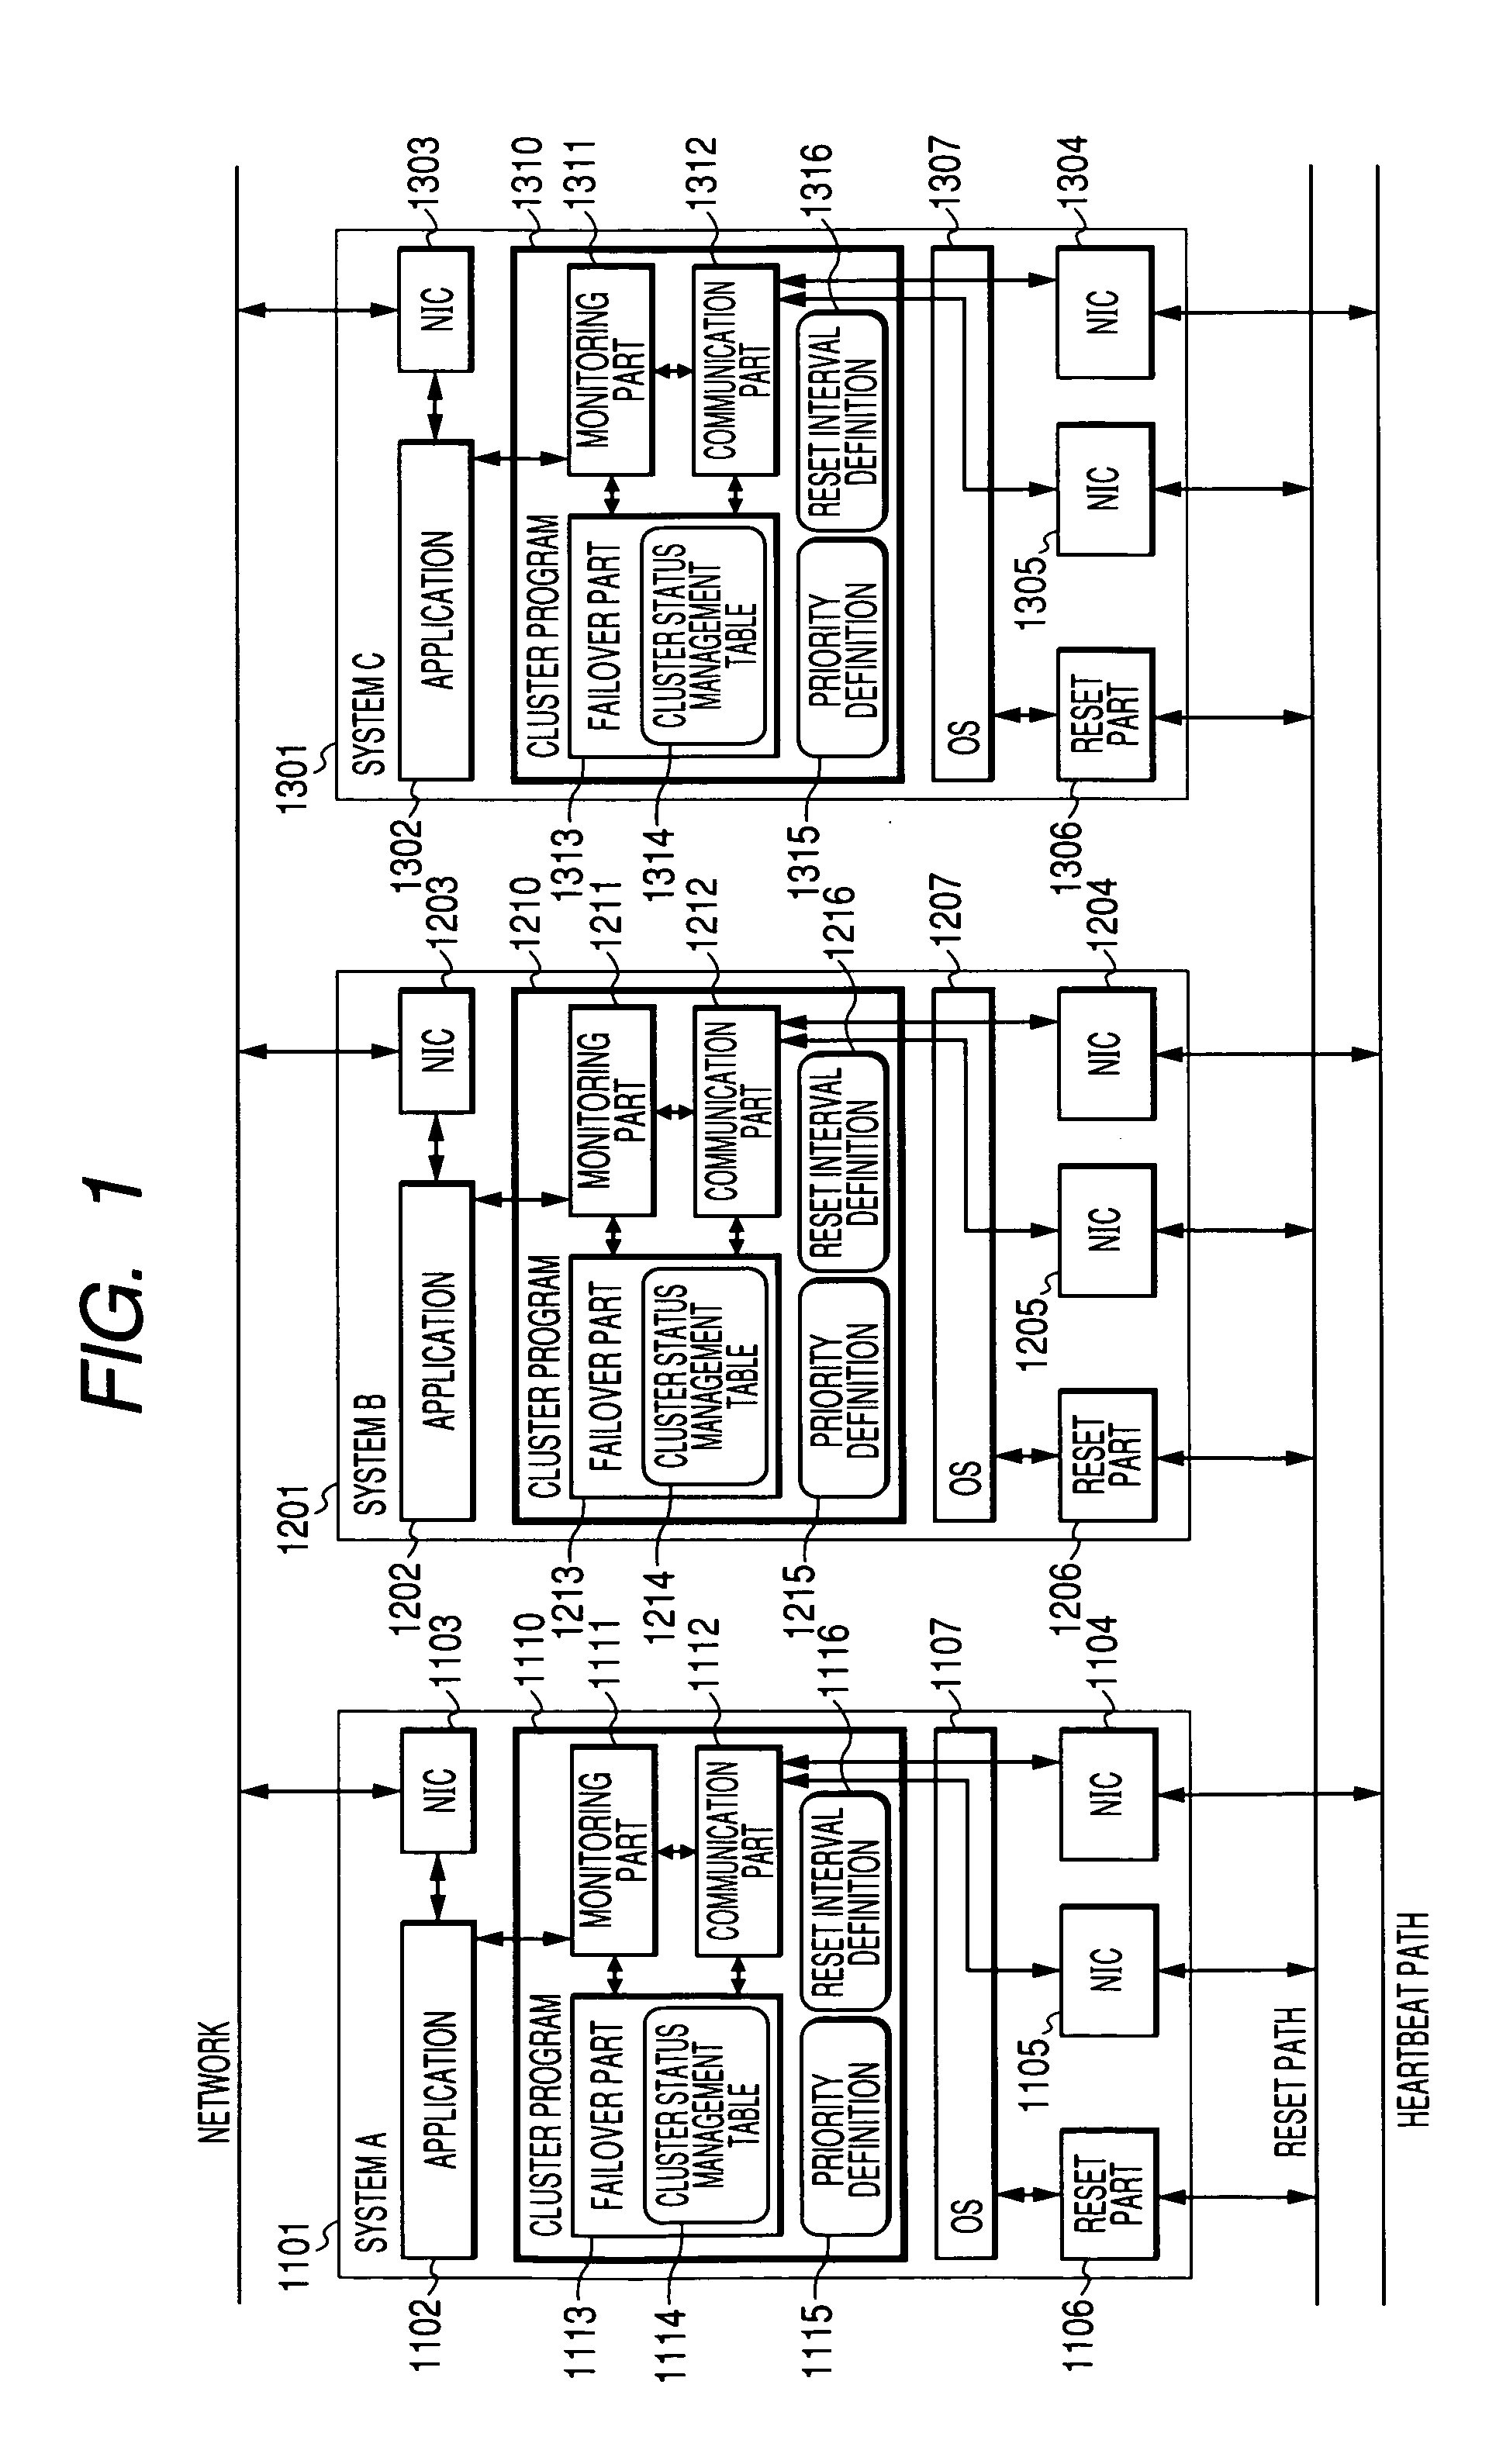 Failover method for a cluster computer system